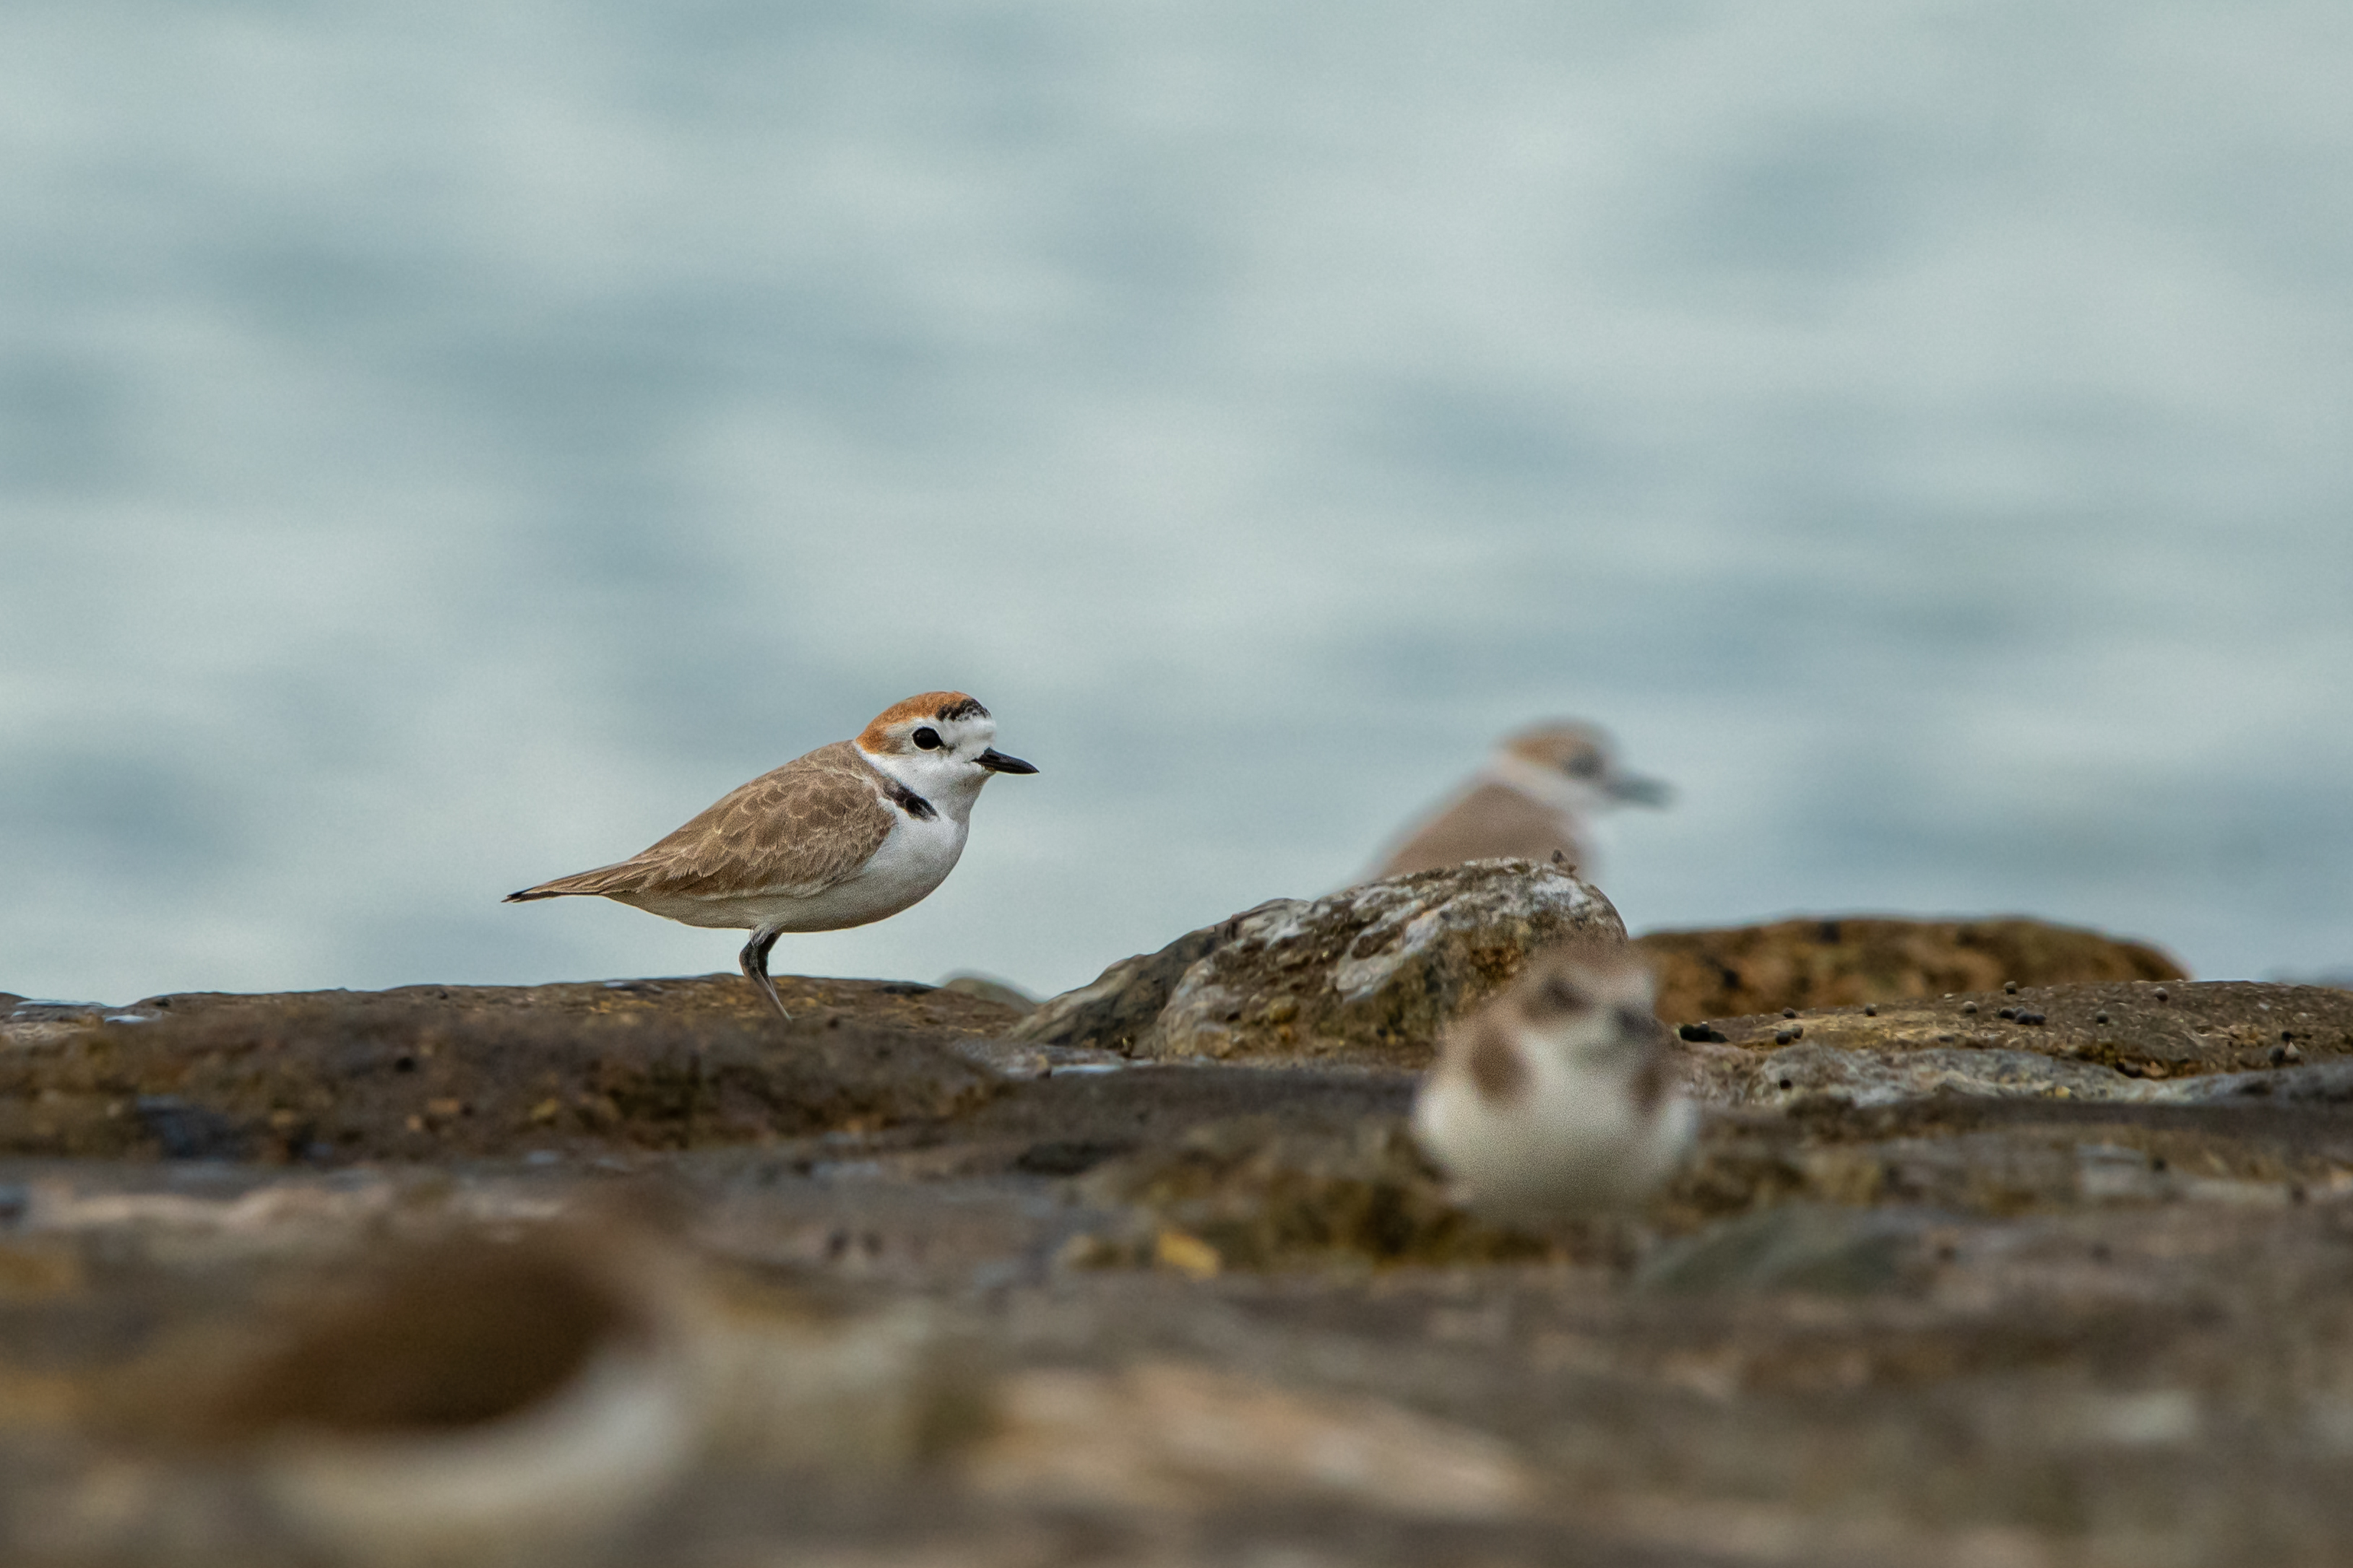 White-faced Plover at Marina East Drive on 04 Feb 2023. Photo credit: Leong Zhen Yan